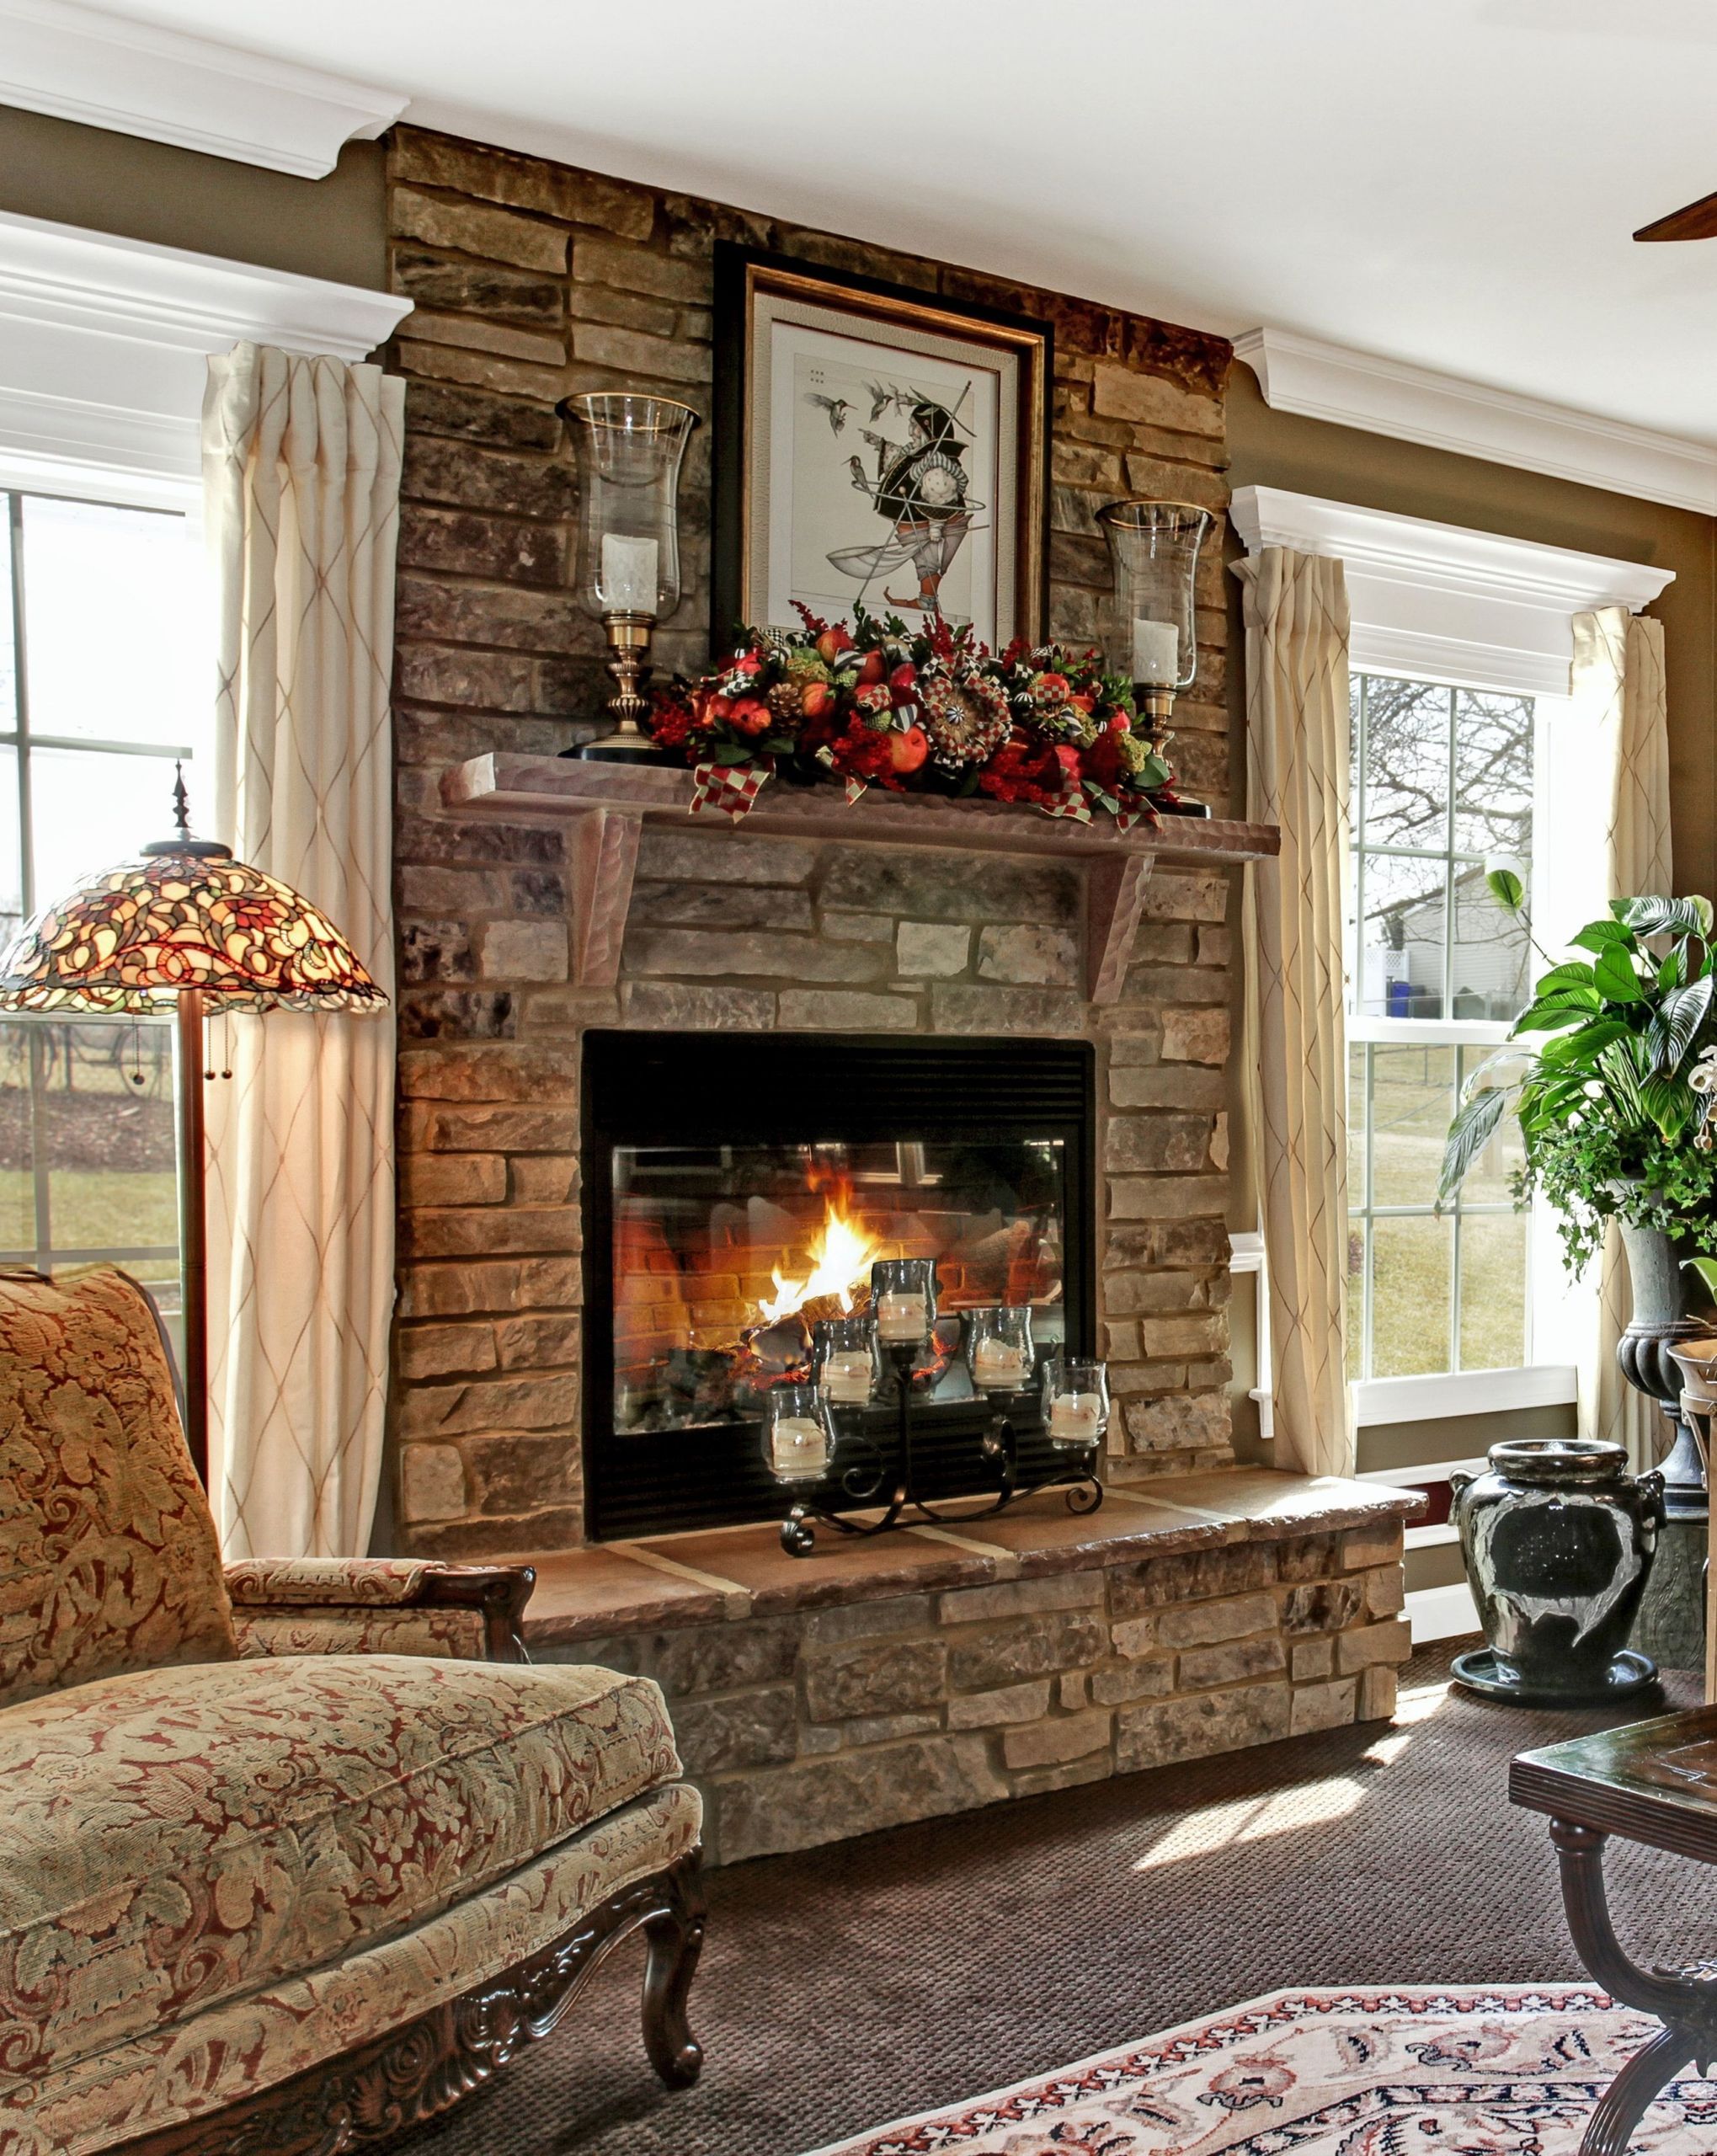 Rustic Living Room With Fireplace
 41 Cozy Rustic Living Room Decoration with Fireplace